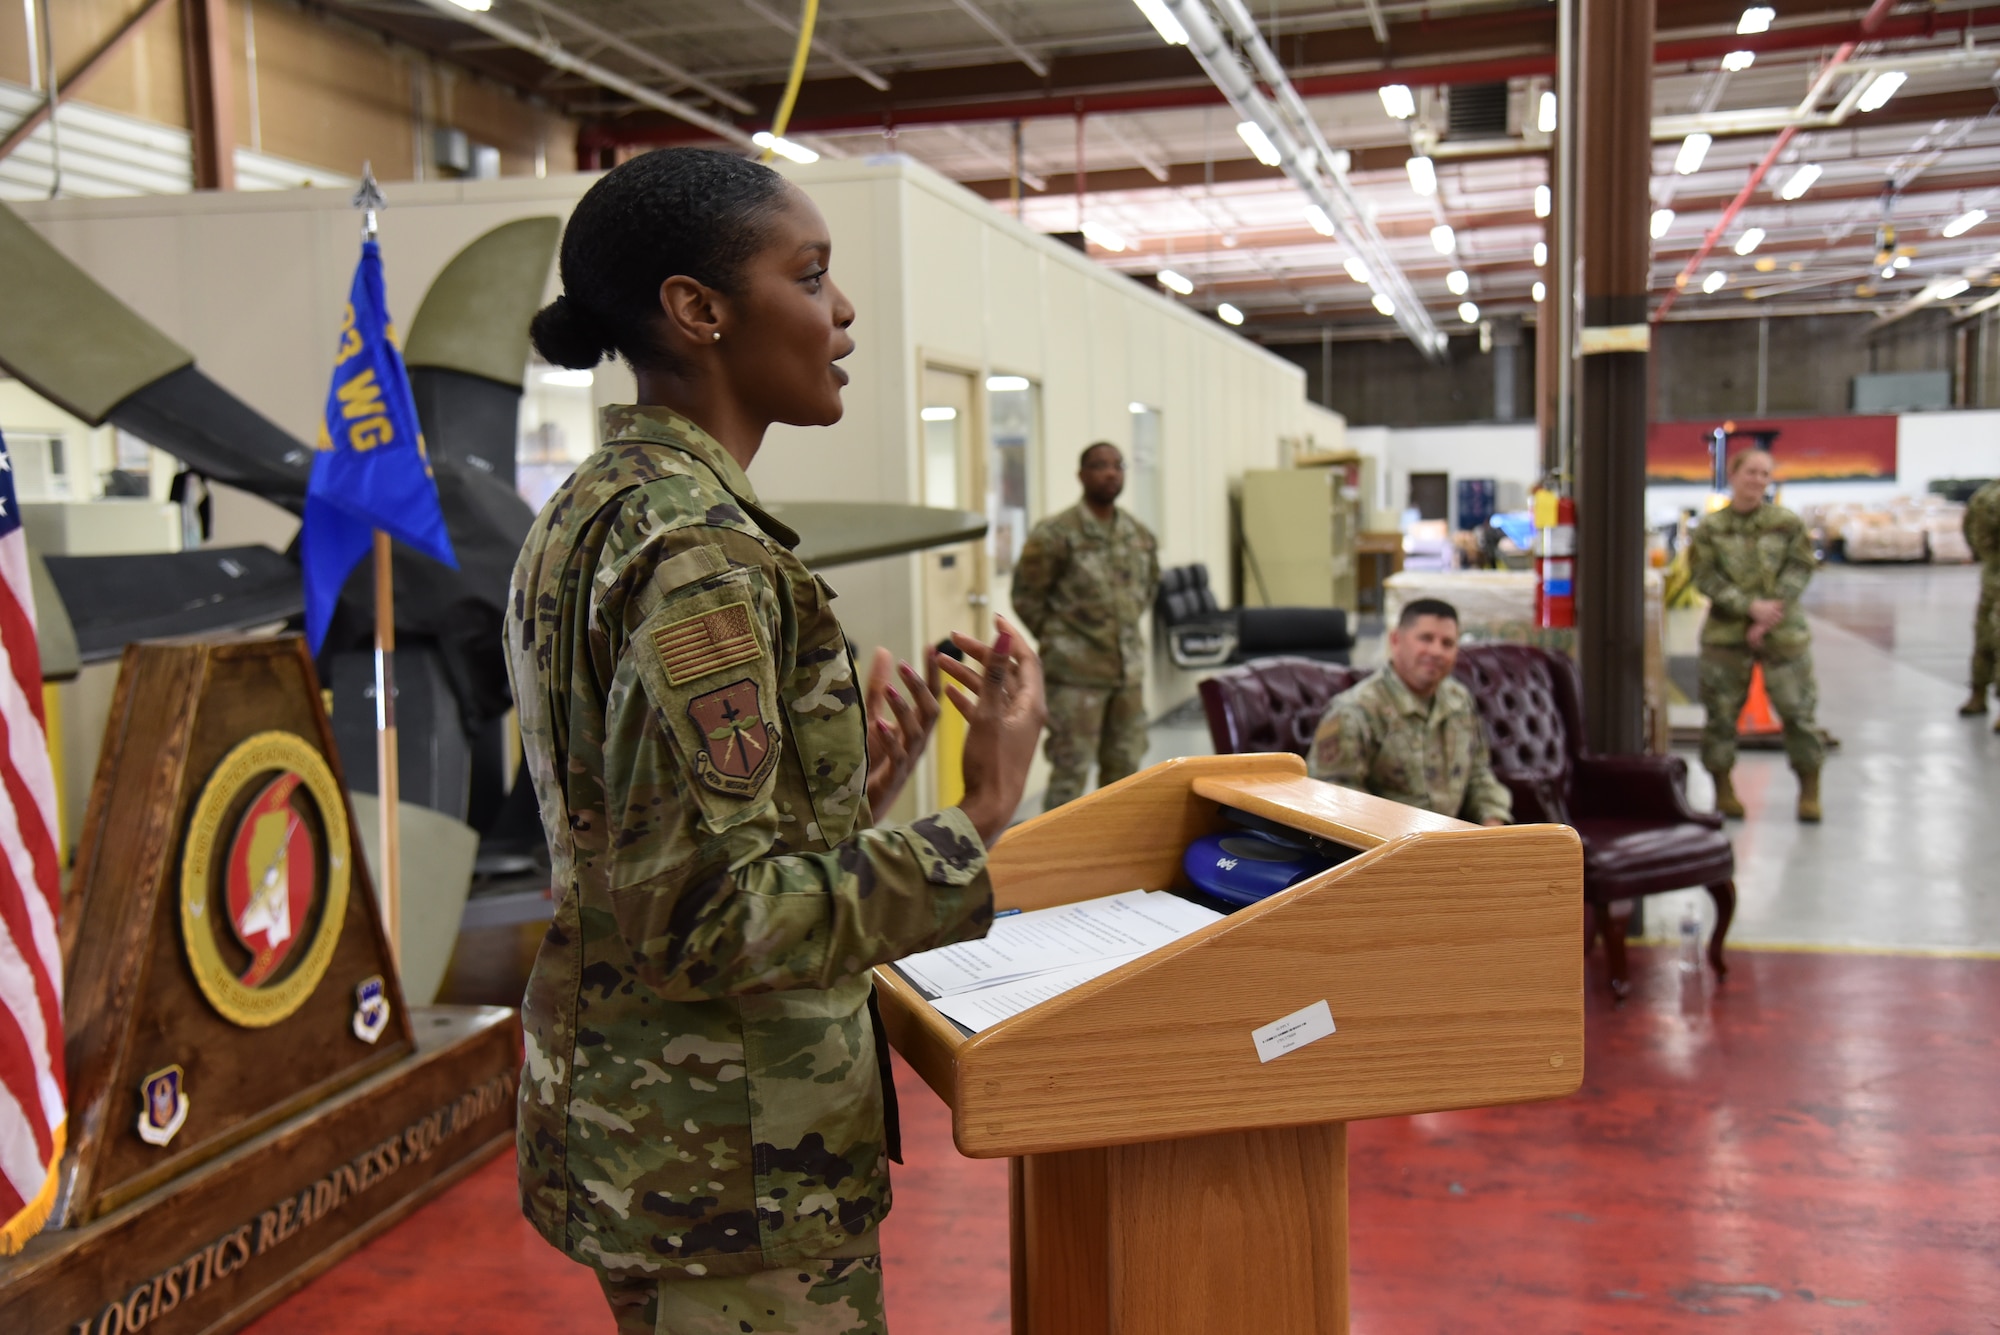 Lt. Col. Tillman stands behind a podium as people in the background listen to her speak